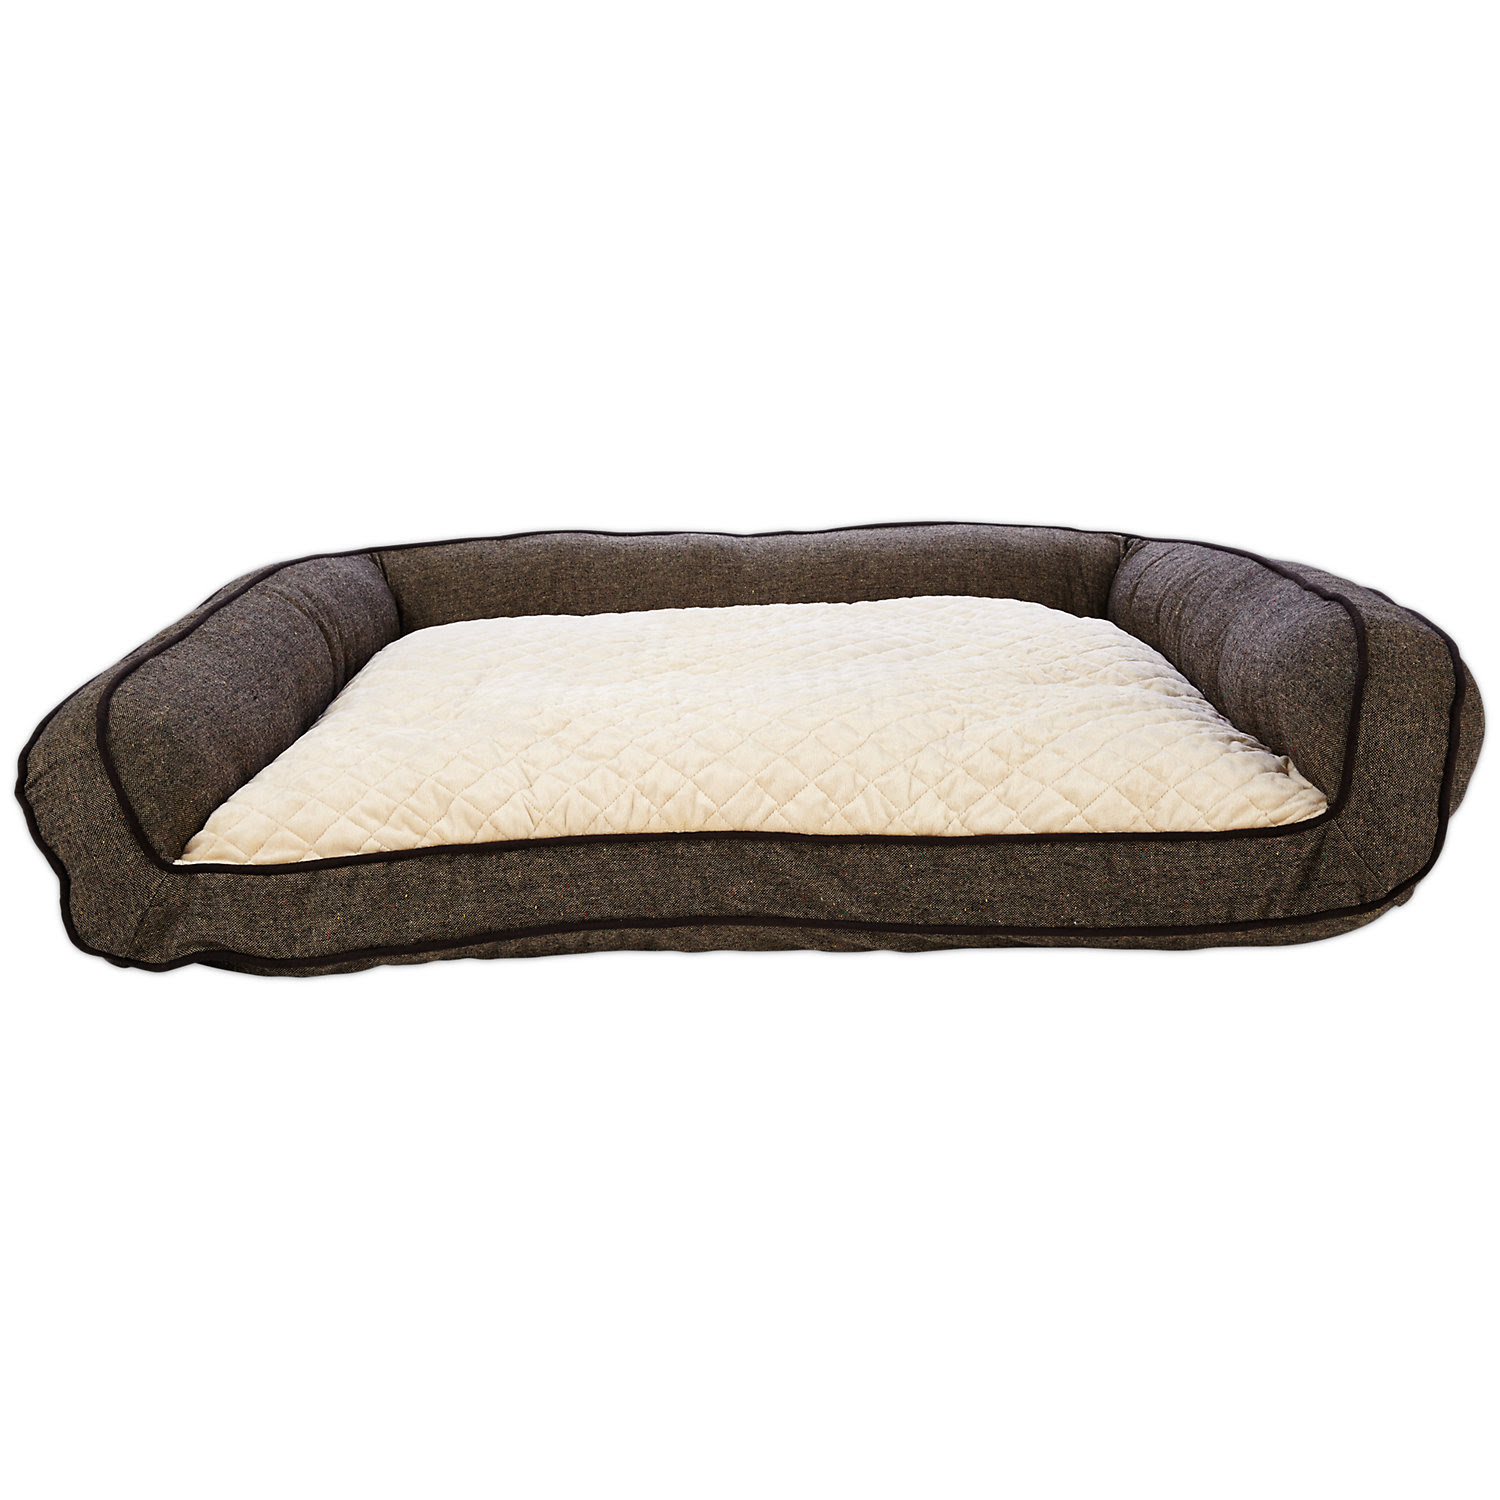 Harmony Memory Foam Couch Dog Bed in Brown, 48 L x 36 W, X-Large